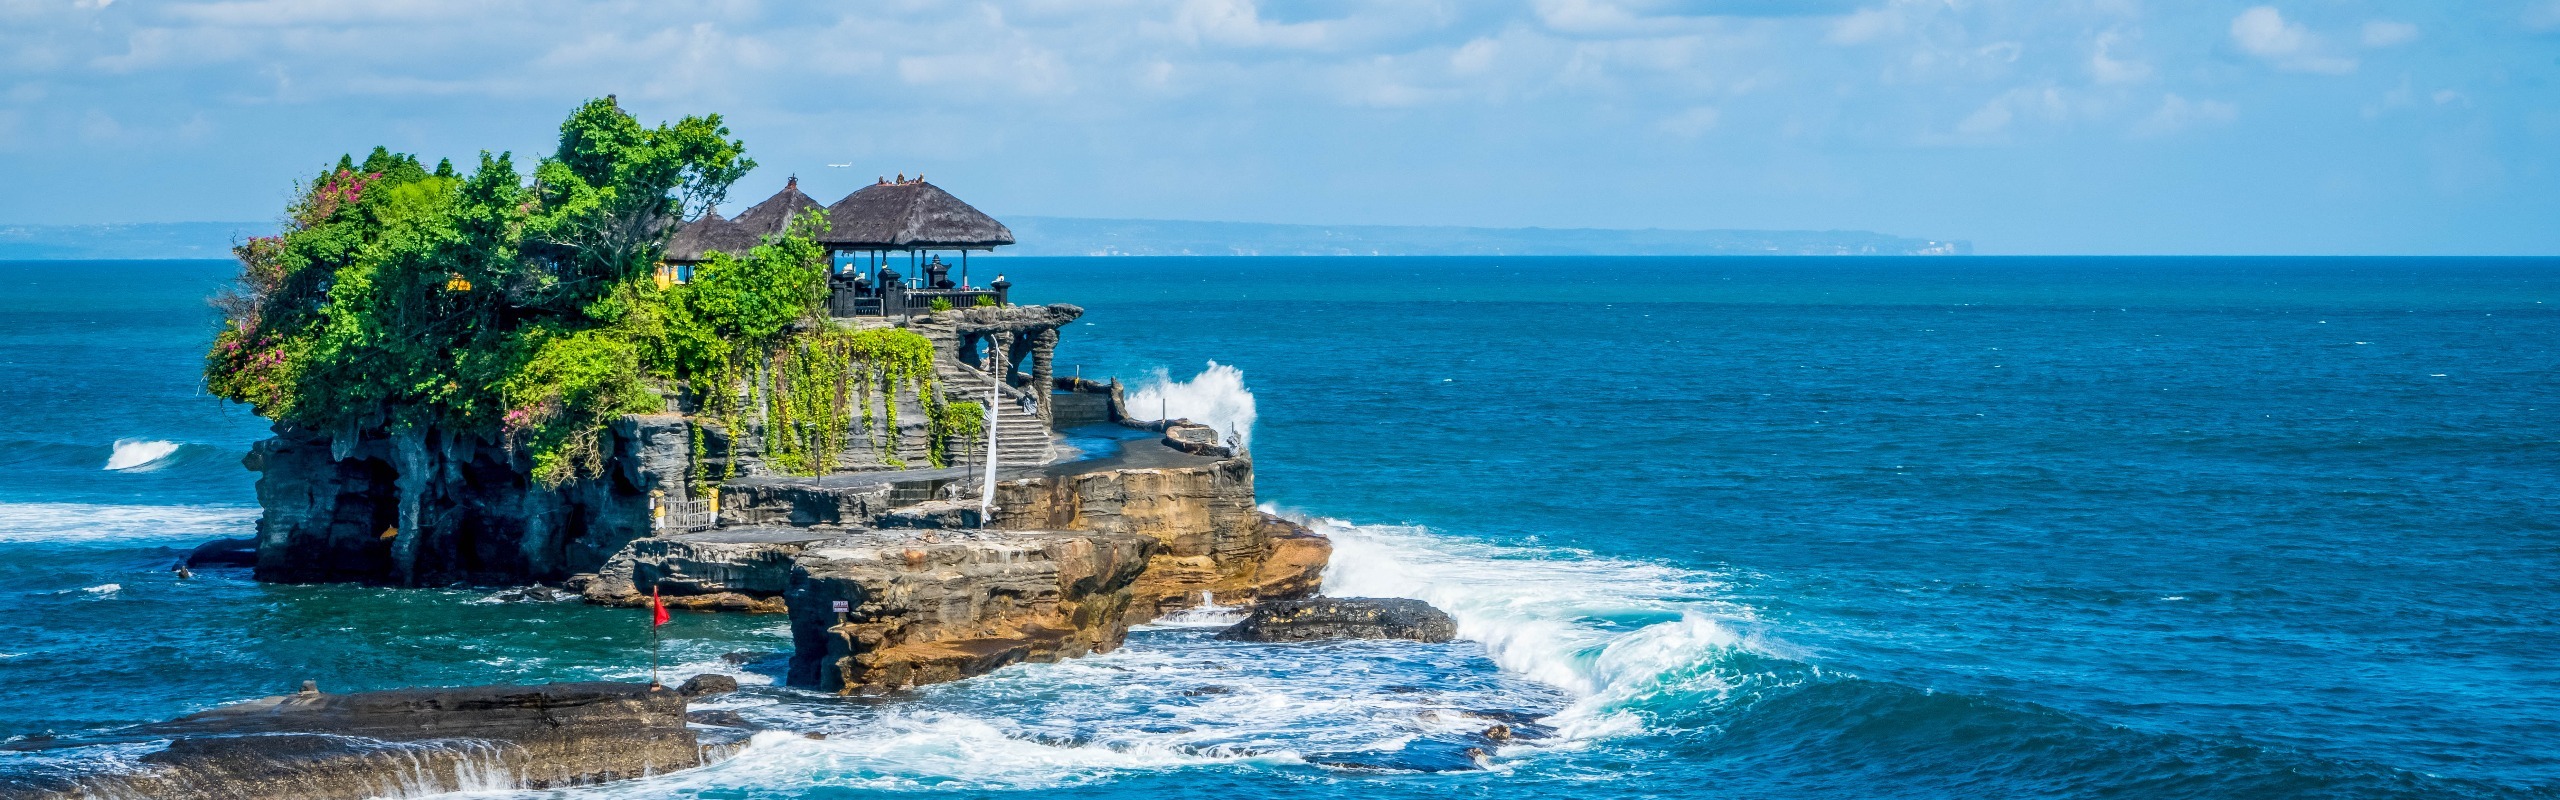 Best (and Worst) Times to Visit Bali 2023/2024 & When is the Rainy Season